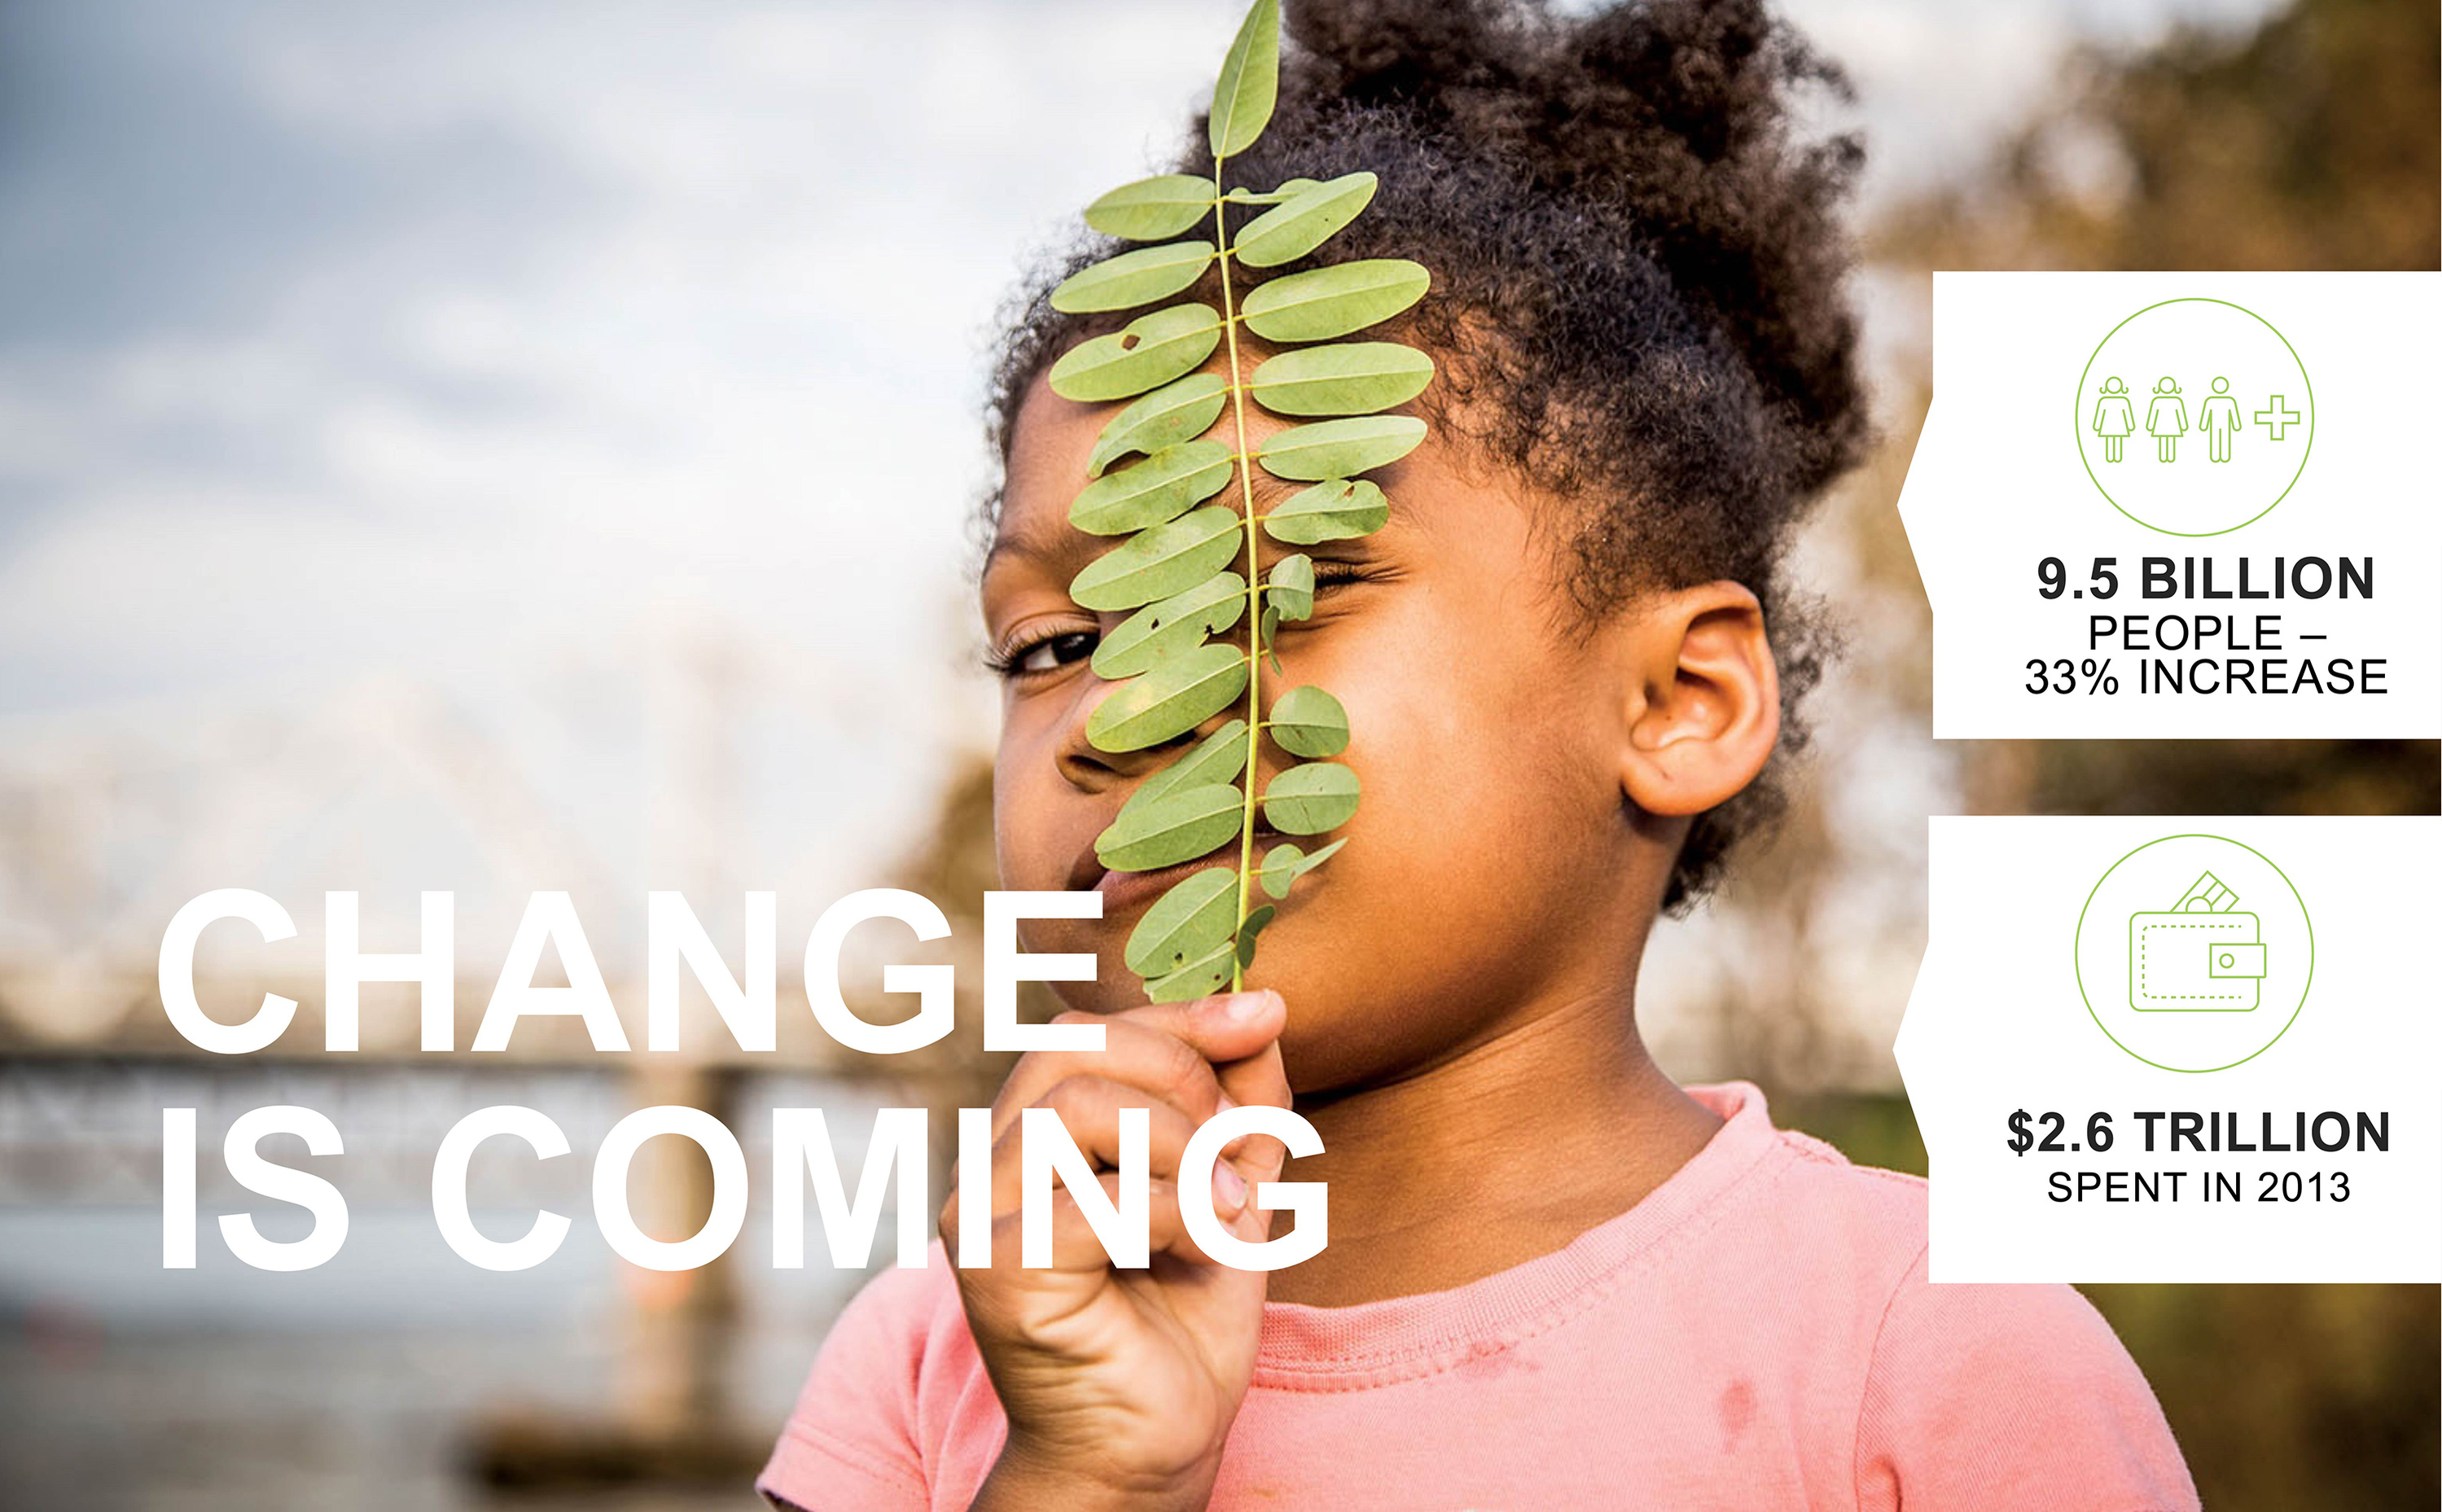 The Power of Nature: Change is Coming